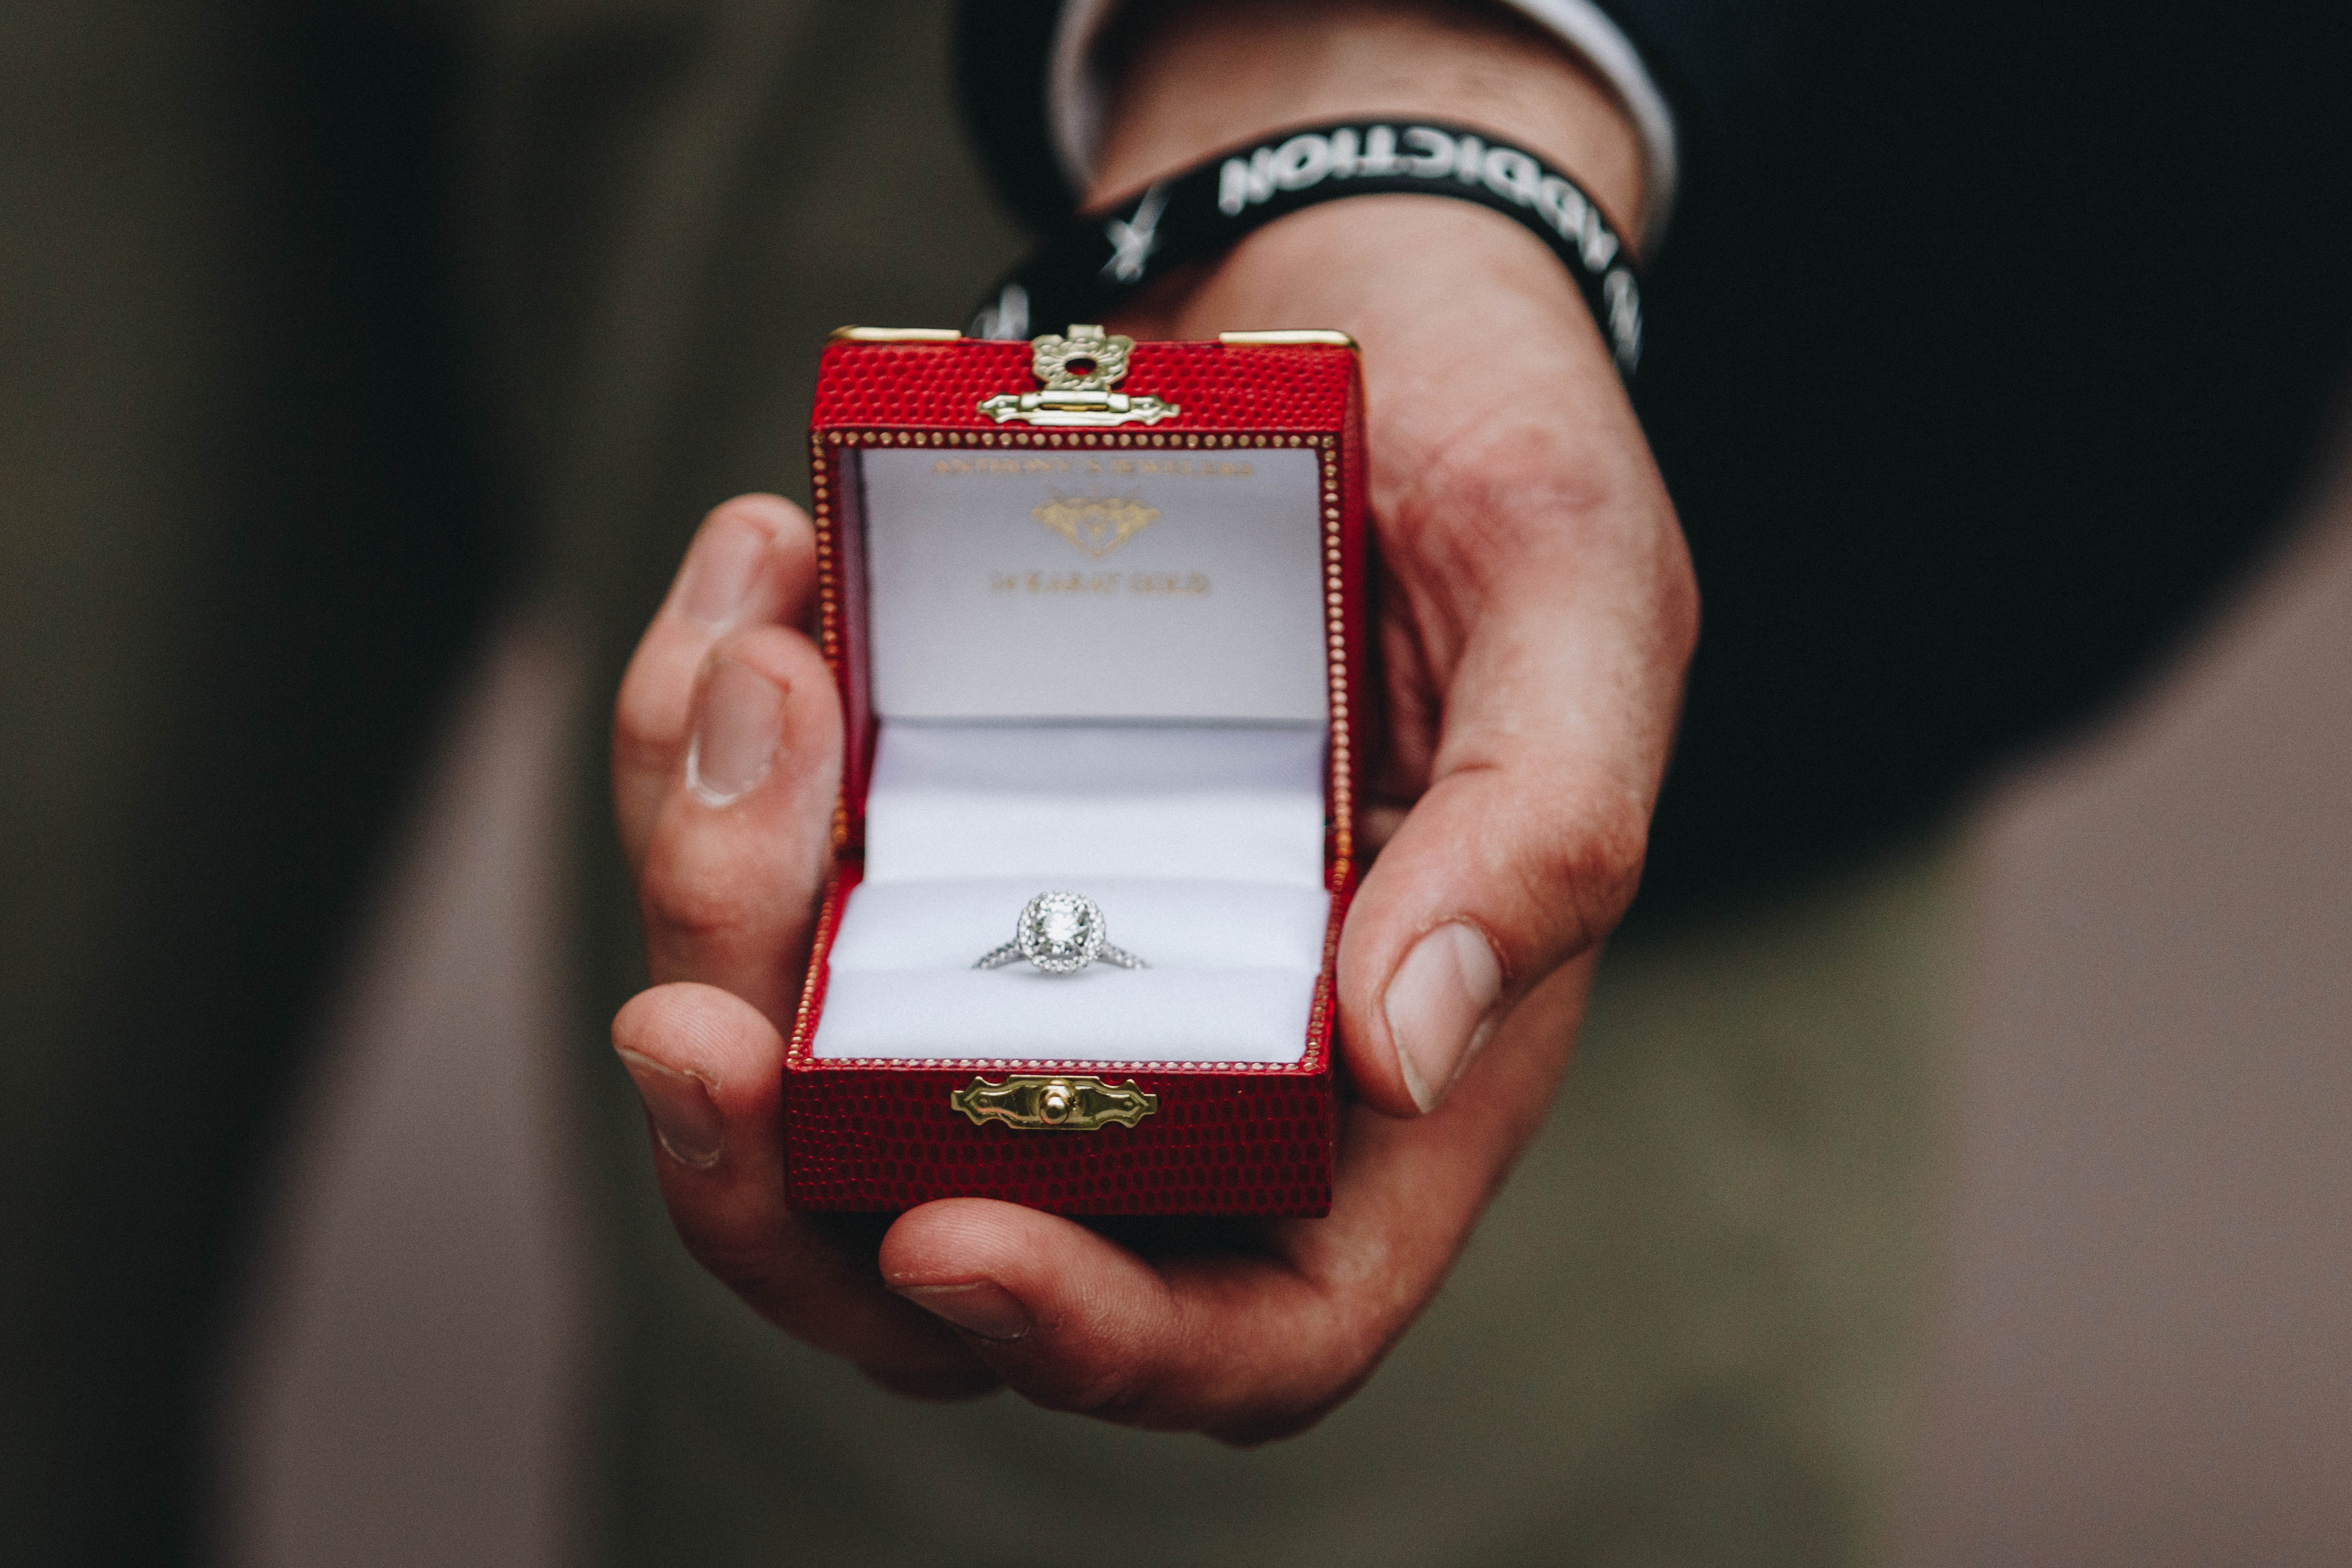 Nick got a new job and proposed. | Source: Unsplash